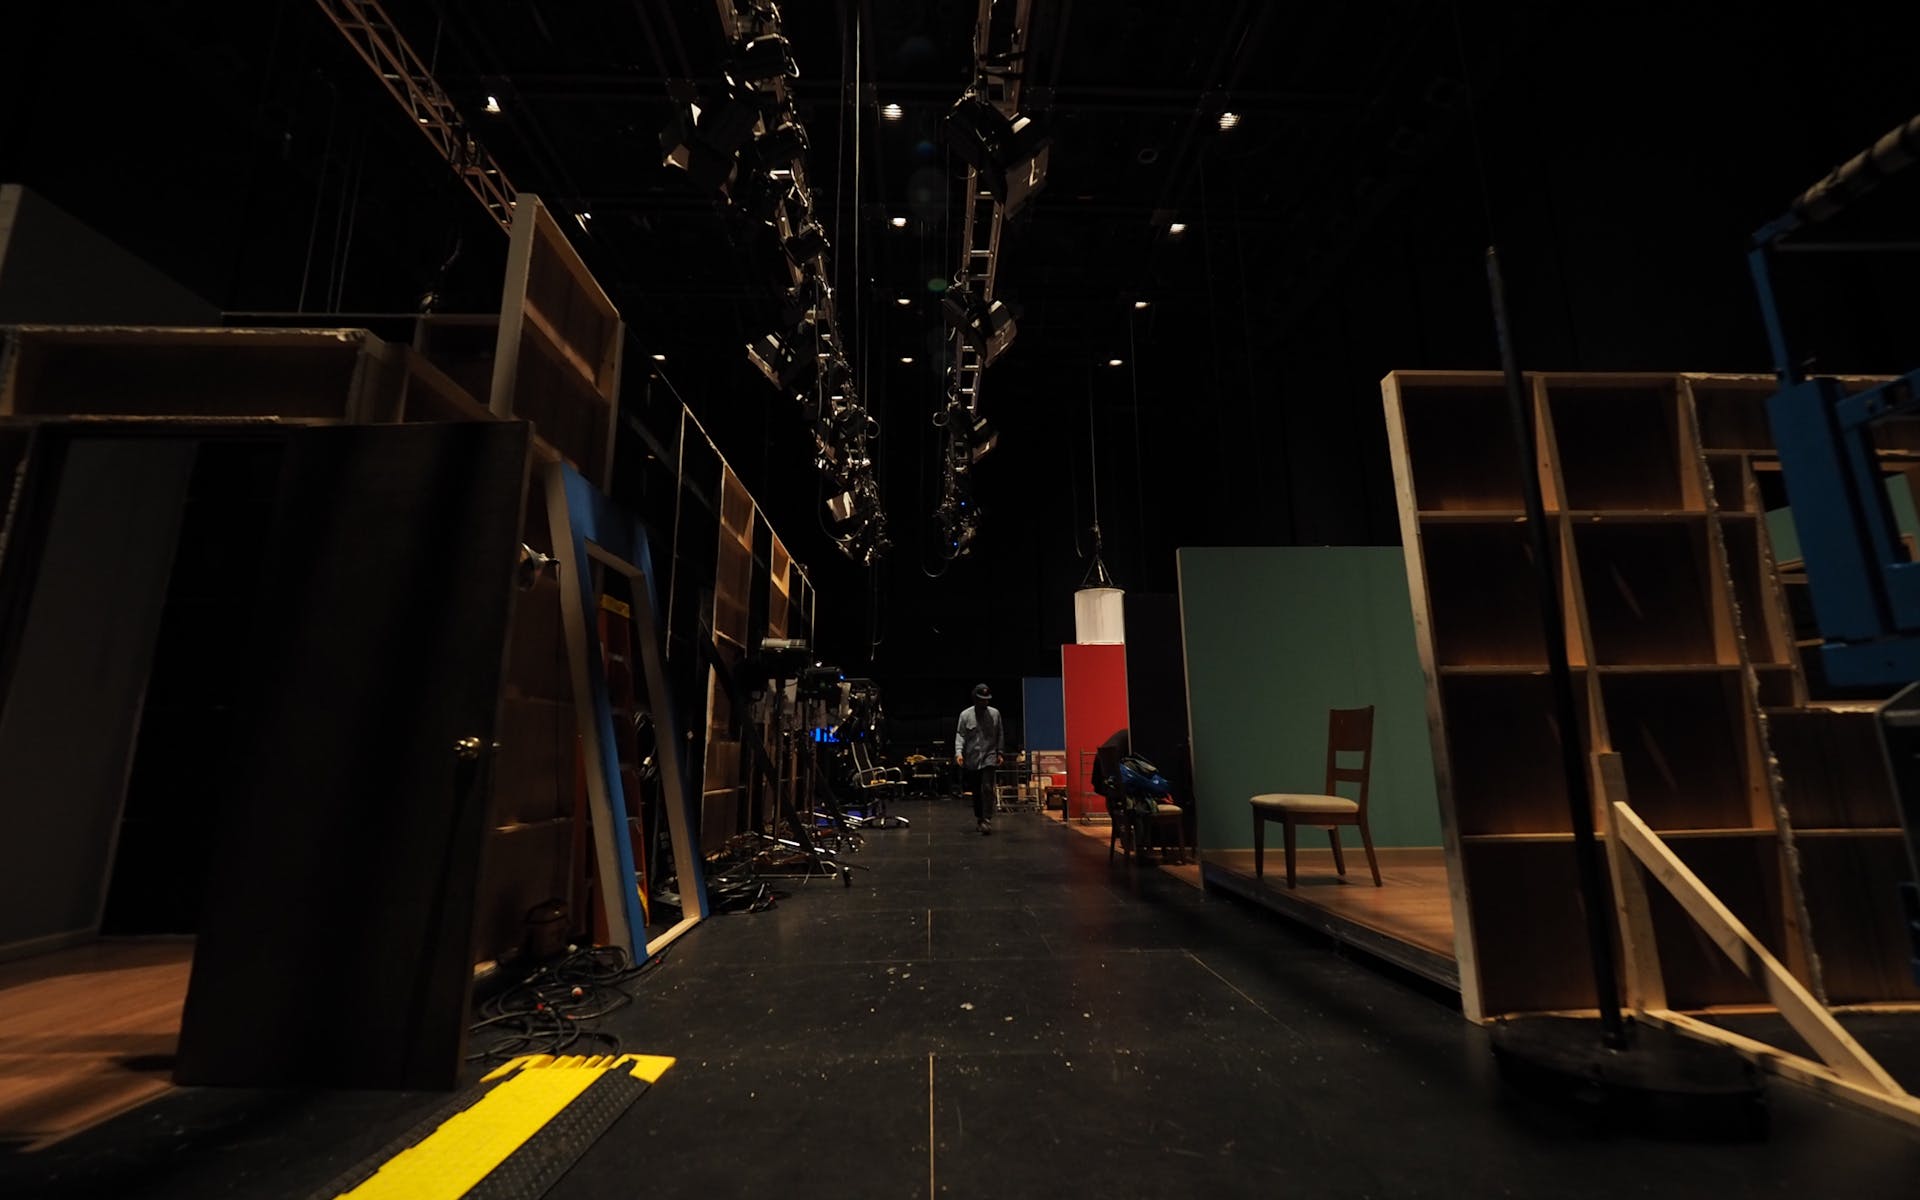 A man walks through the darkened backstage of a theater.